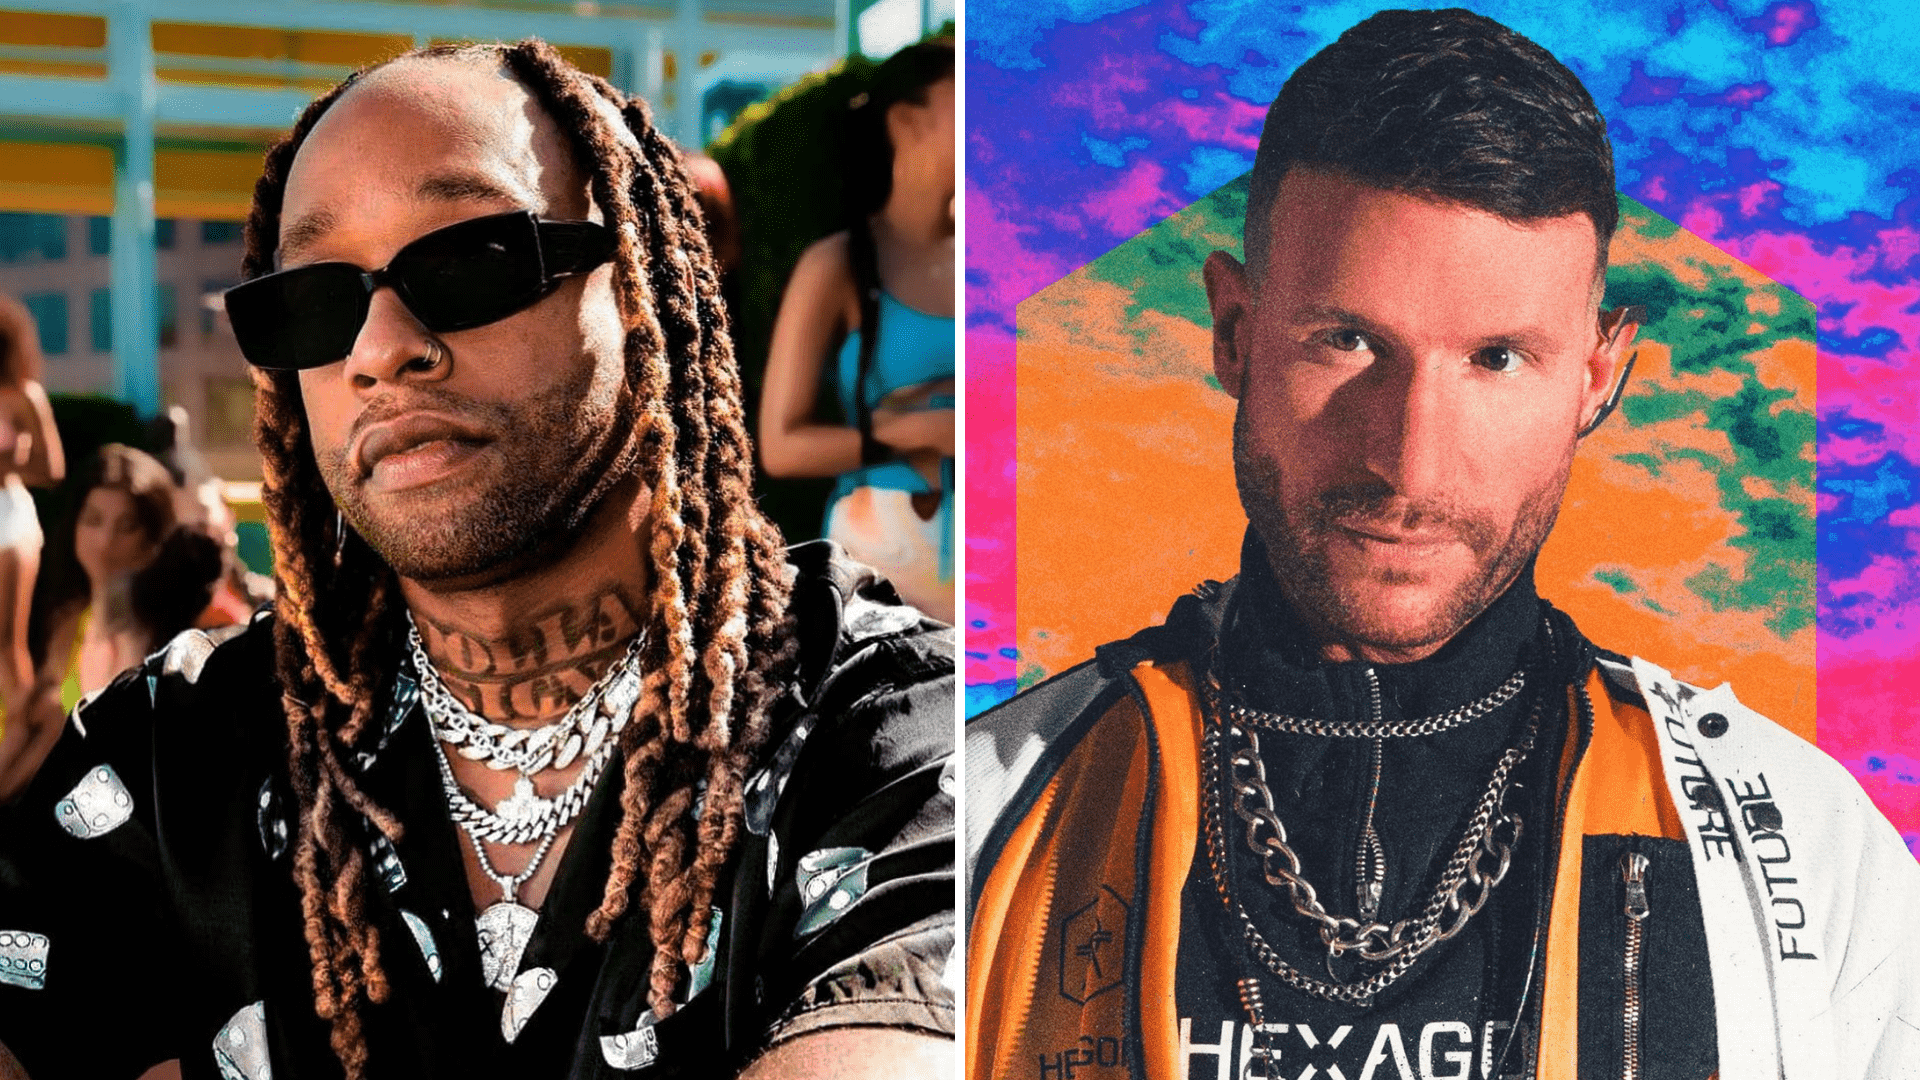 Don Diablo & Ty Dolla $ign unite for pop crossover jam ‘Too Much To Ask’: Listen